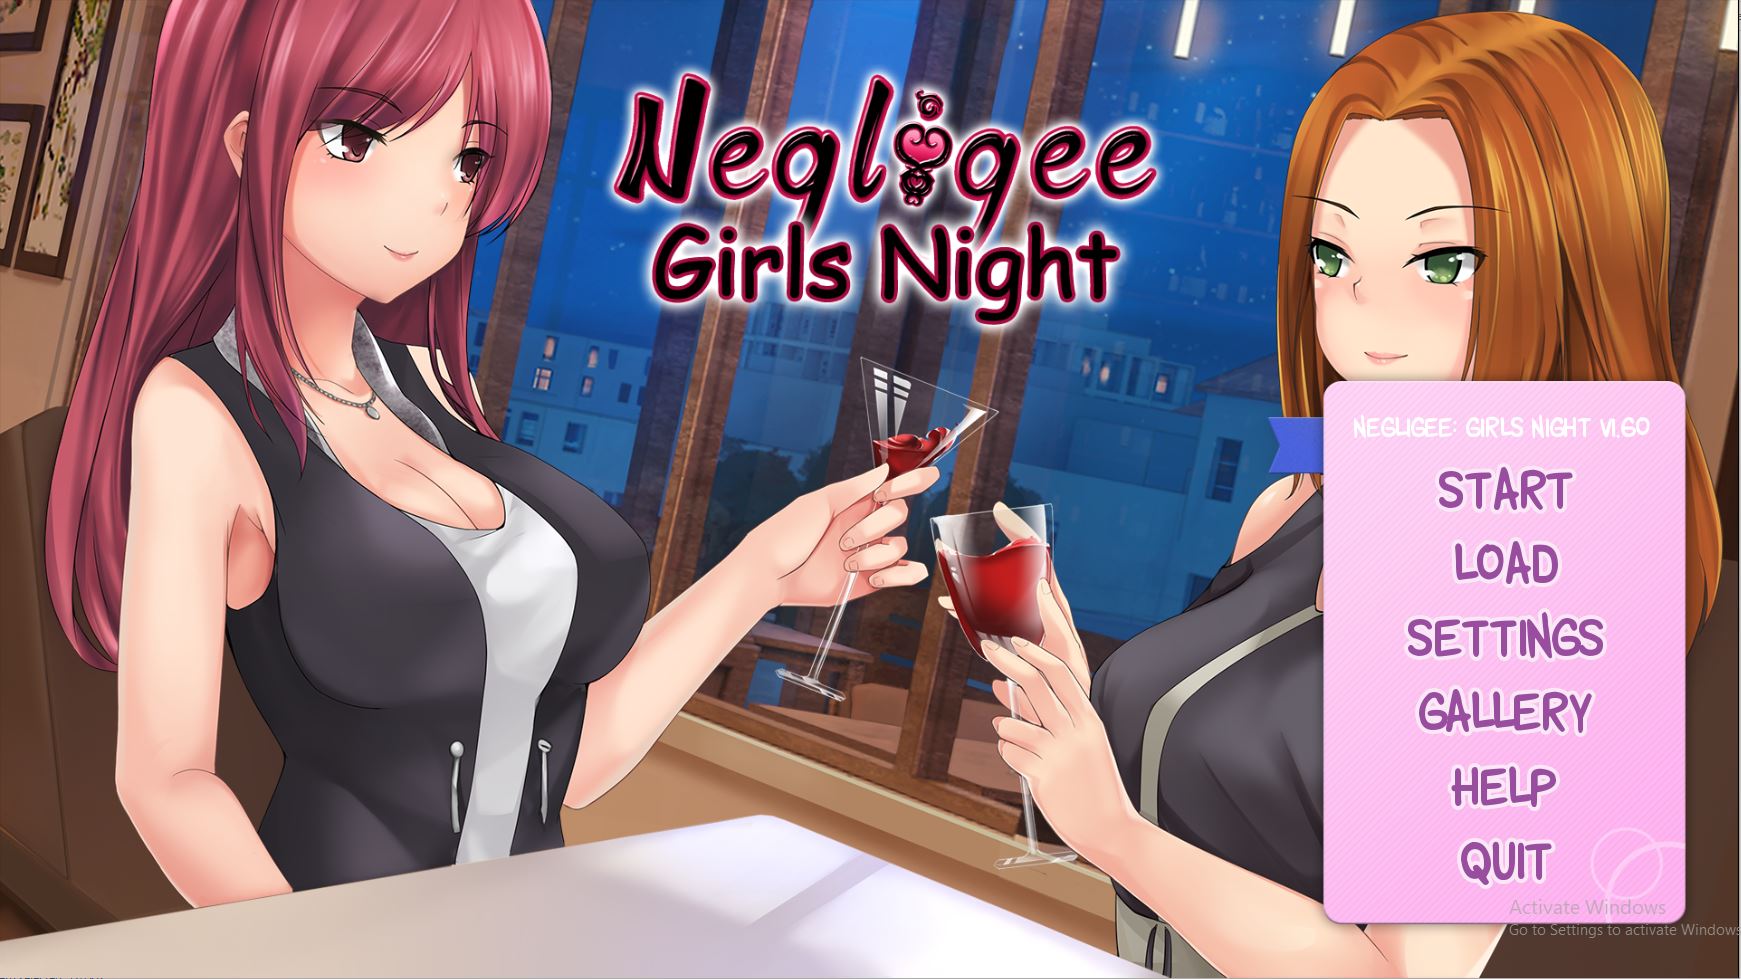 Negligee Visual Novel Porn - Negligee: Girls Night â€“ Final Version (Full Game) - Adult Games Collector